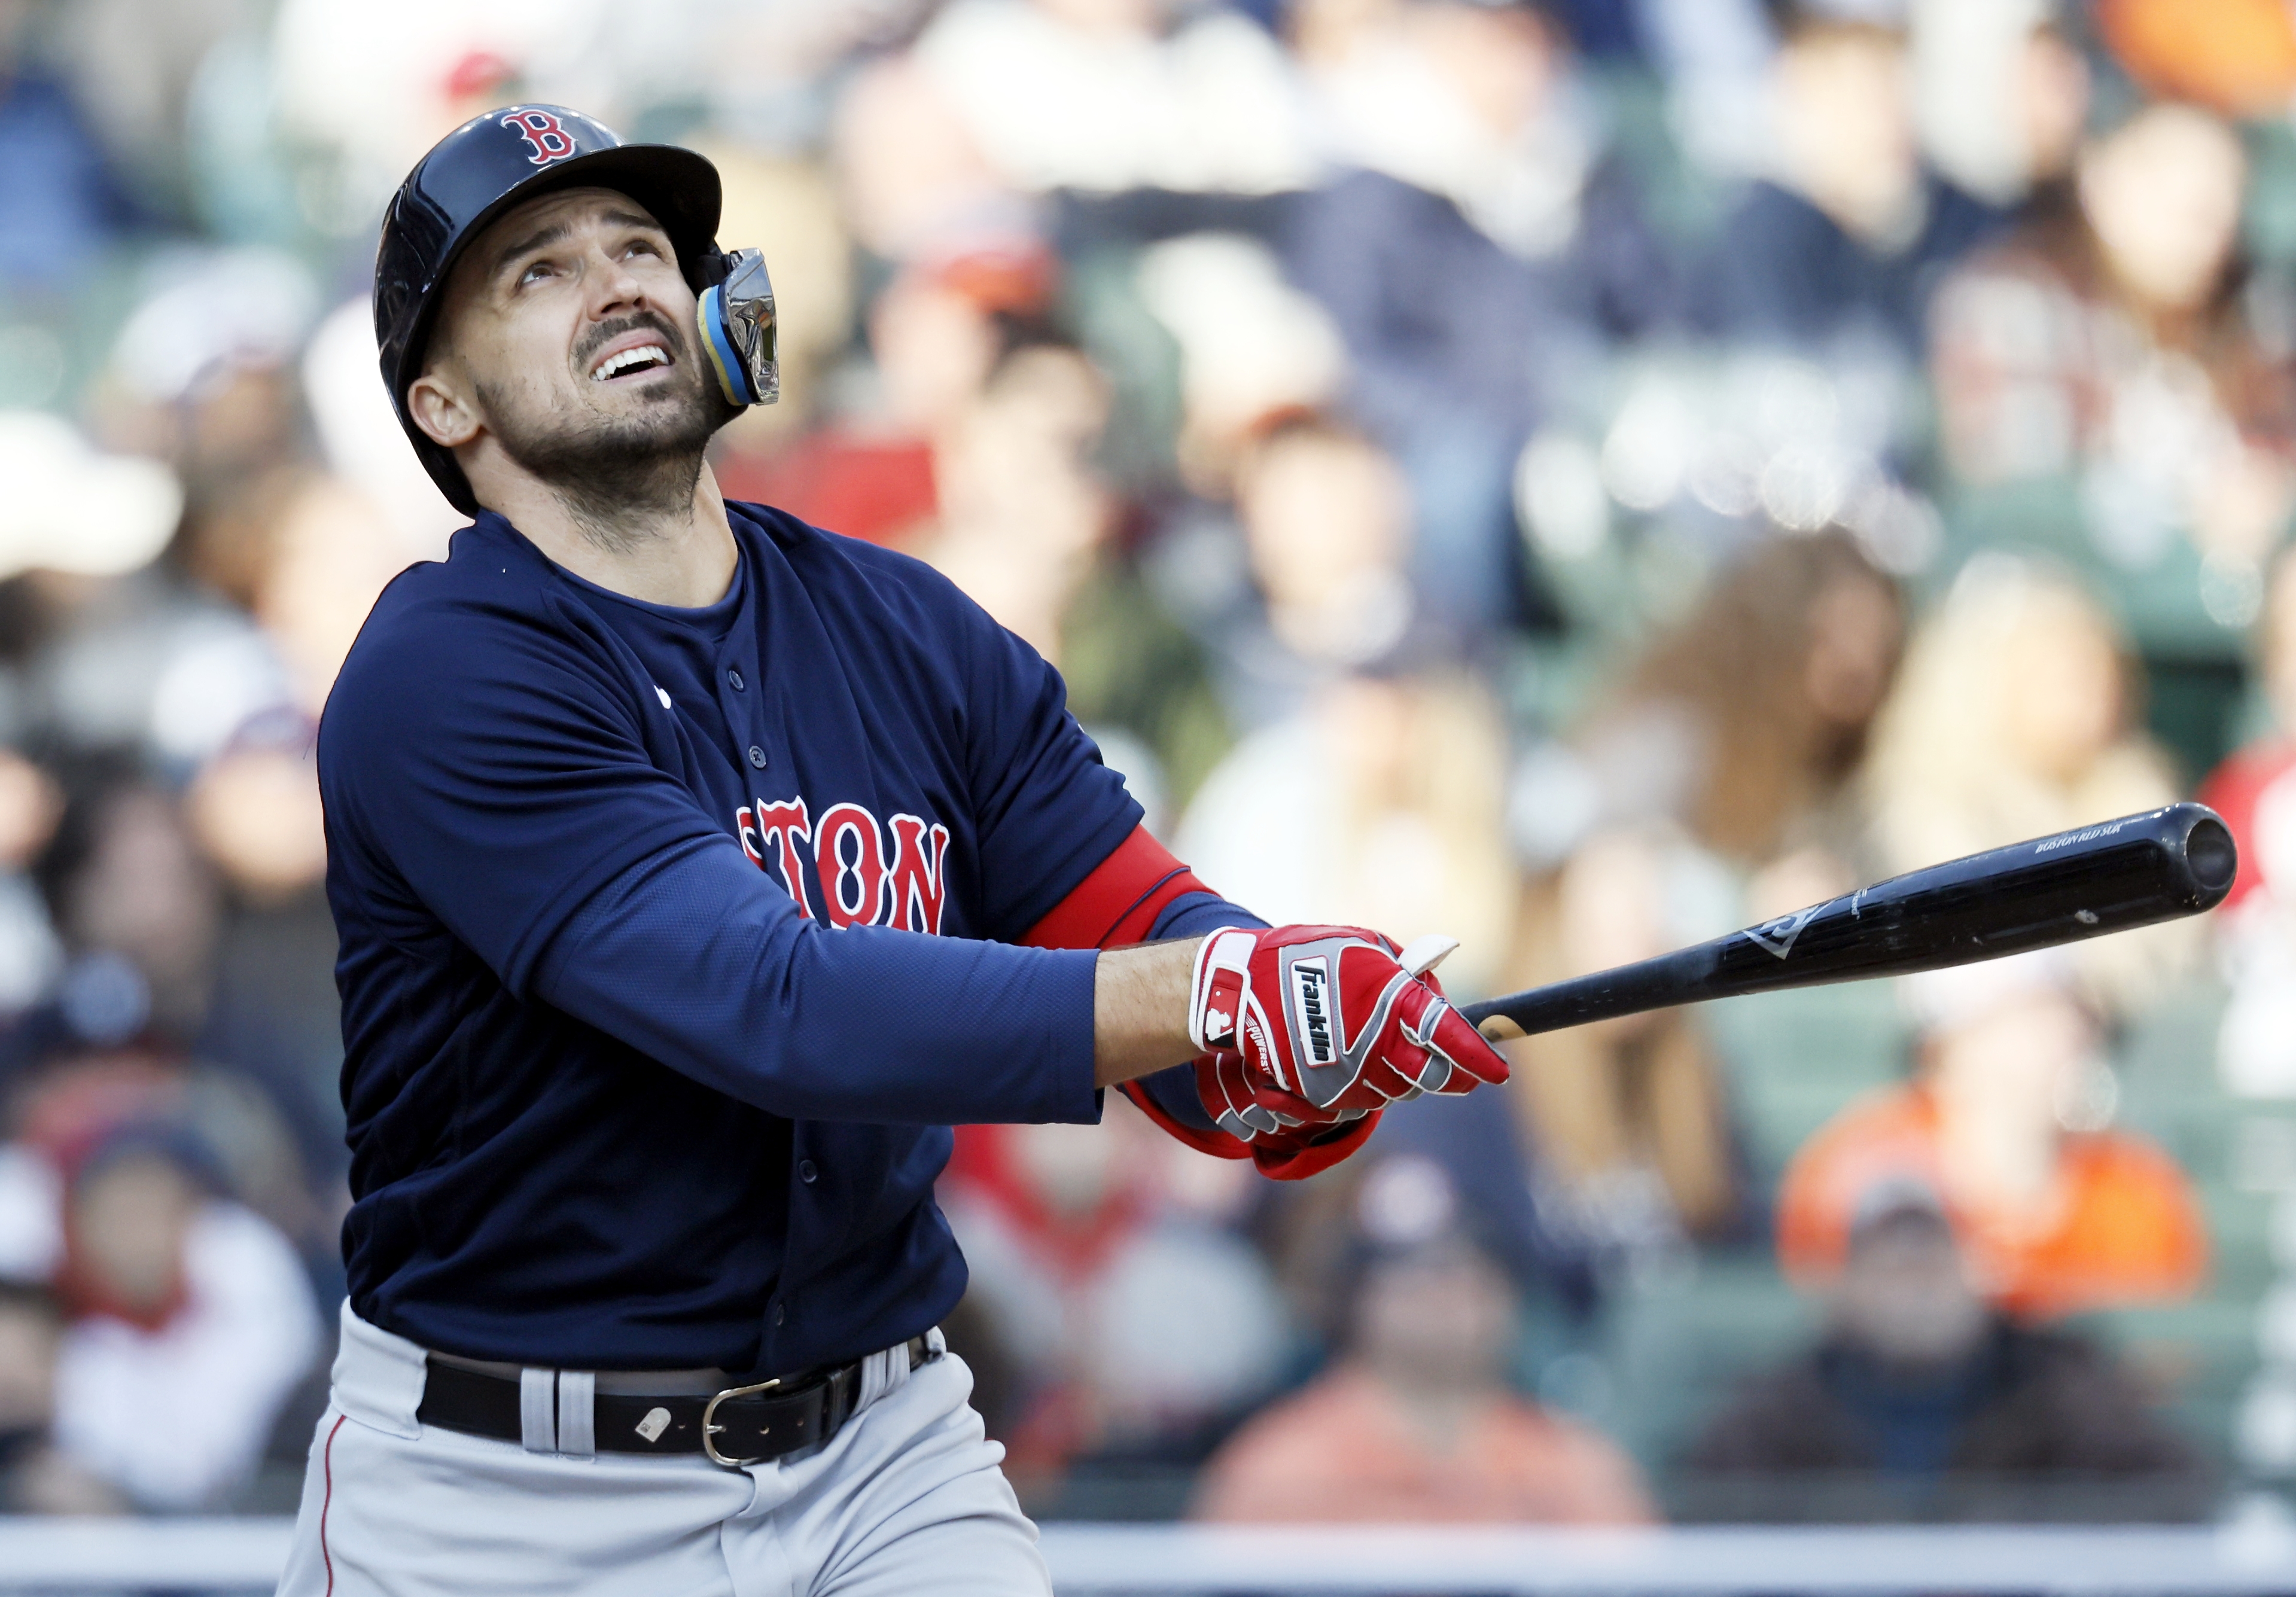 Adam Duvall injury update: Red Sox OF fractured wrist, out indefinitely